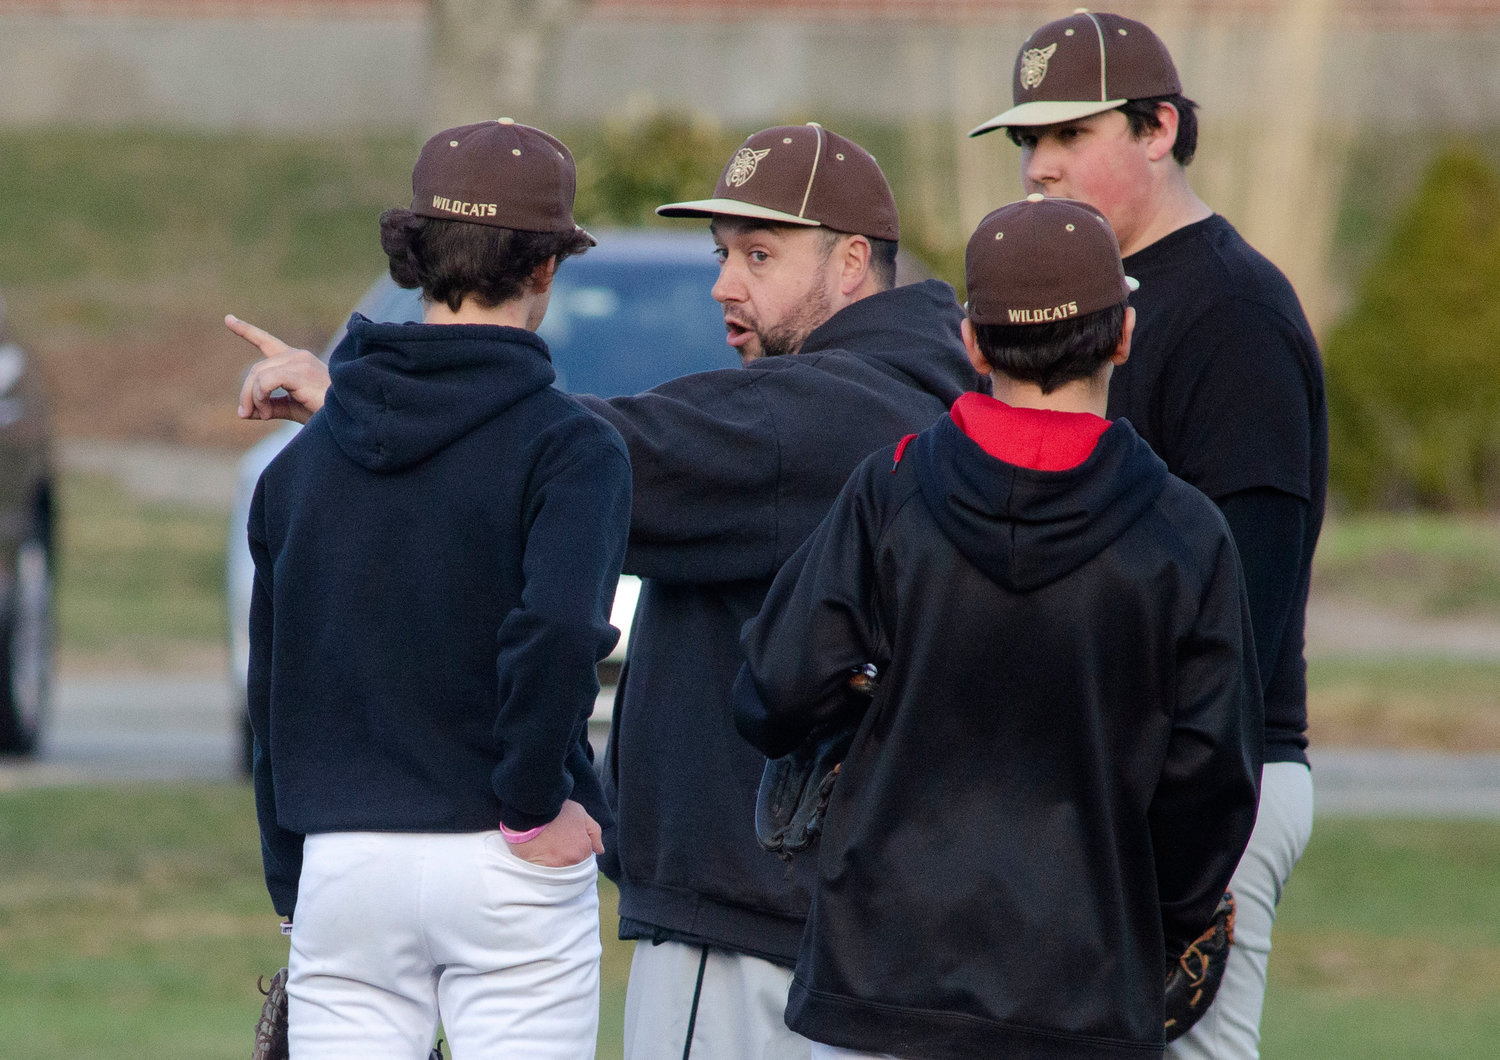 Westport head coach Jason Pacheco speaks to his young infielders during a scrimmage game against Tiverton on Wednesday. The Wildcats who went 8-3 last season, start the 2022 season schedule on Tuesday at Case High School.